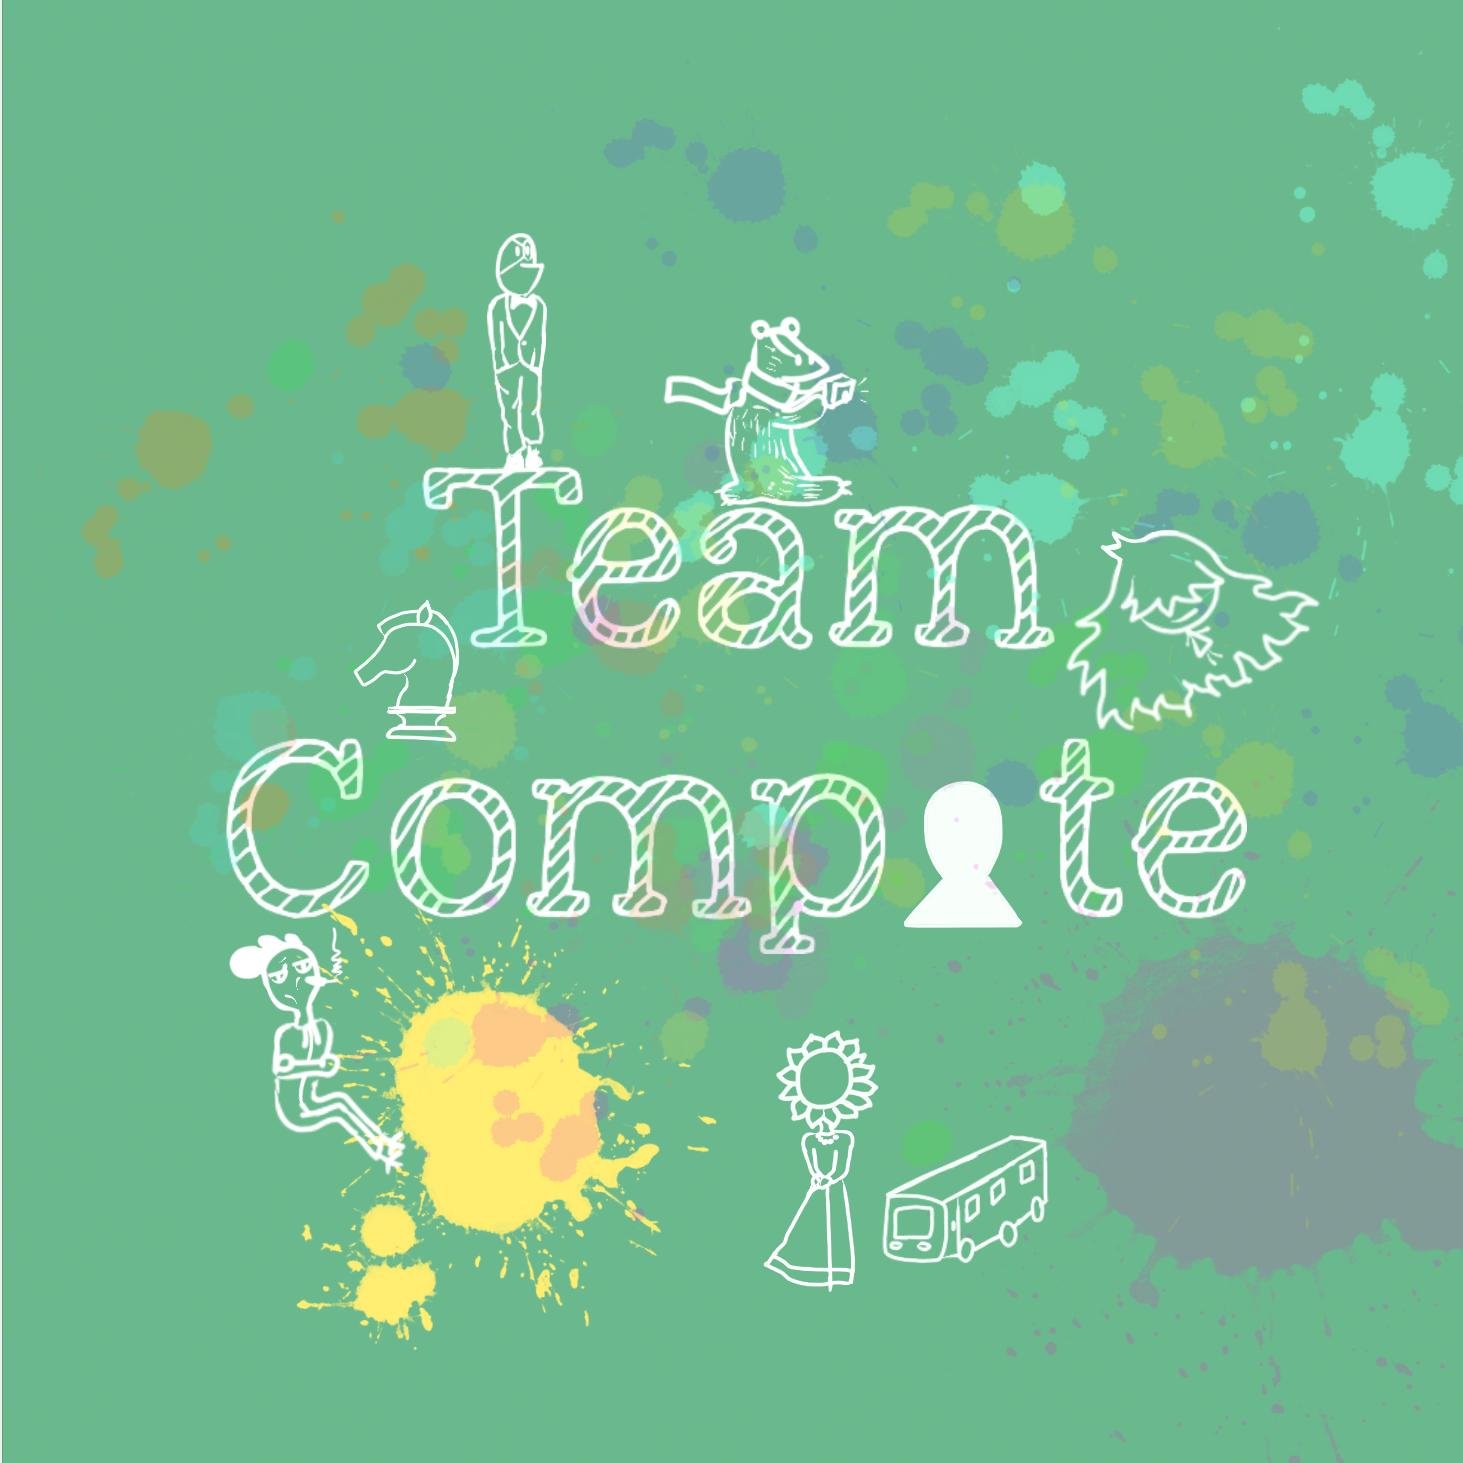 We are a group of crazy french friends creating video games.We love compote. There isn't emoji for compote😱
Give us your opinion :
teamcompote.contact@gmail.com